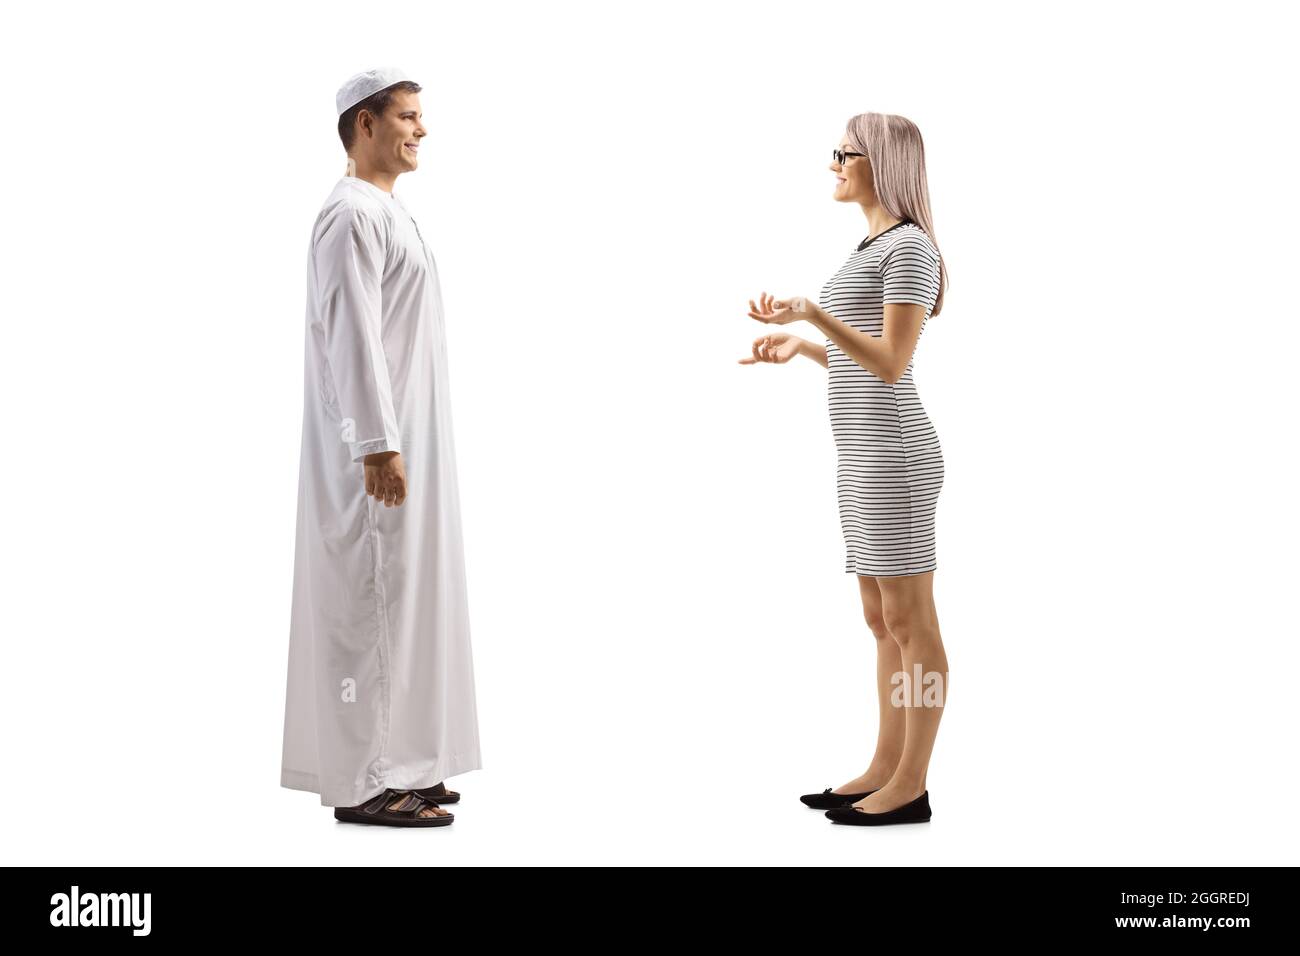 Full length profile shot of a woman talking to a young man in ethnic clothes isolated on white background Stock Photo